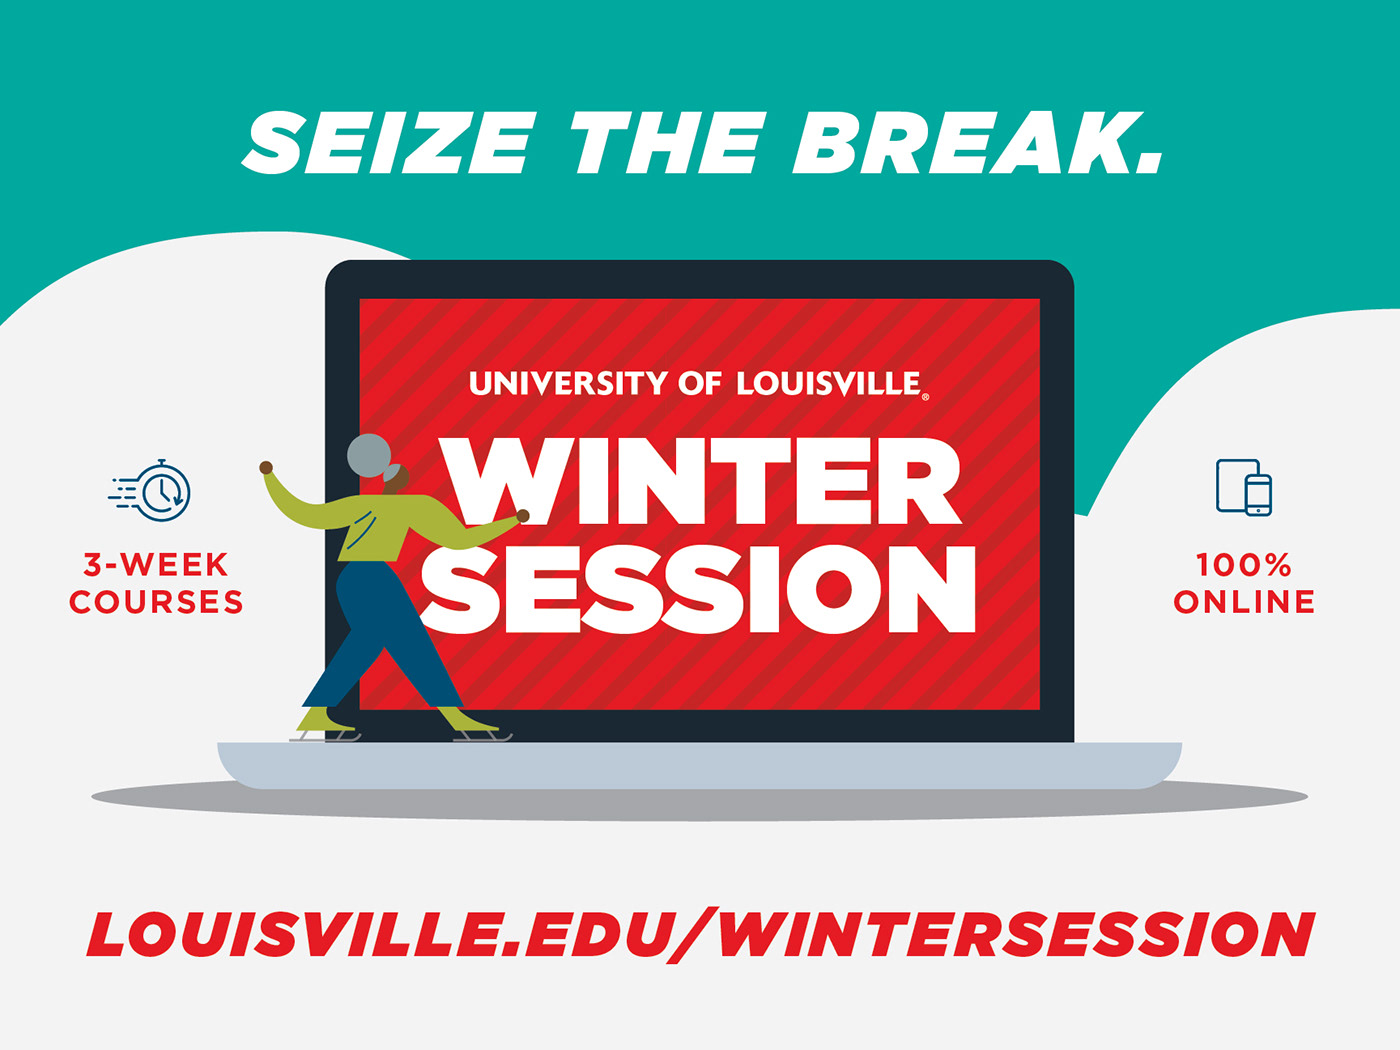 Yard sign promoting UofL University Winter Session courses